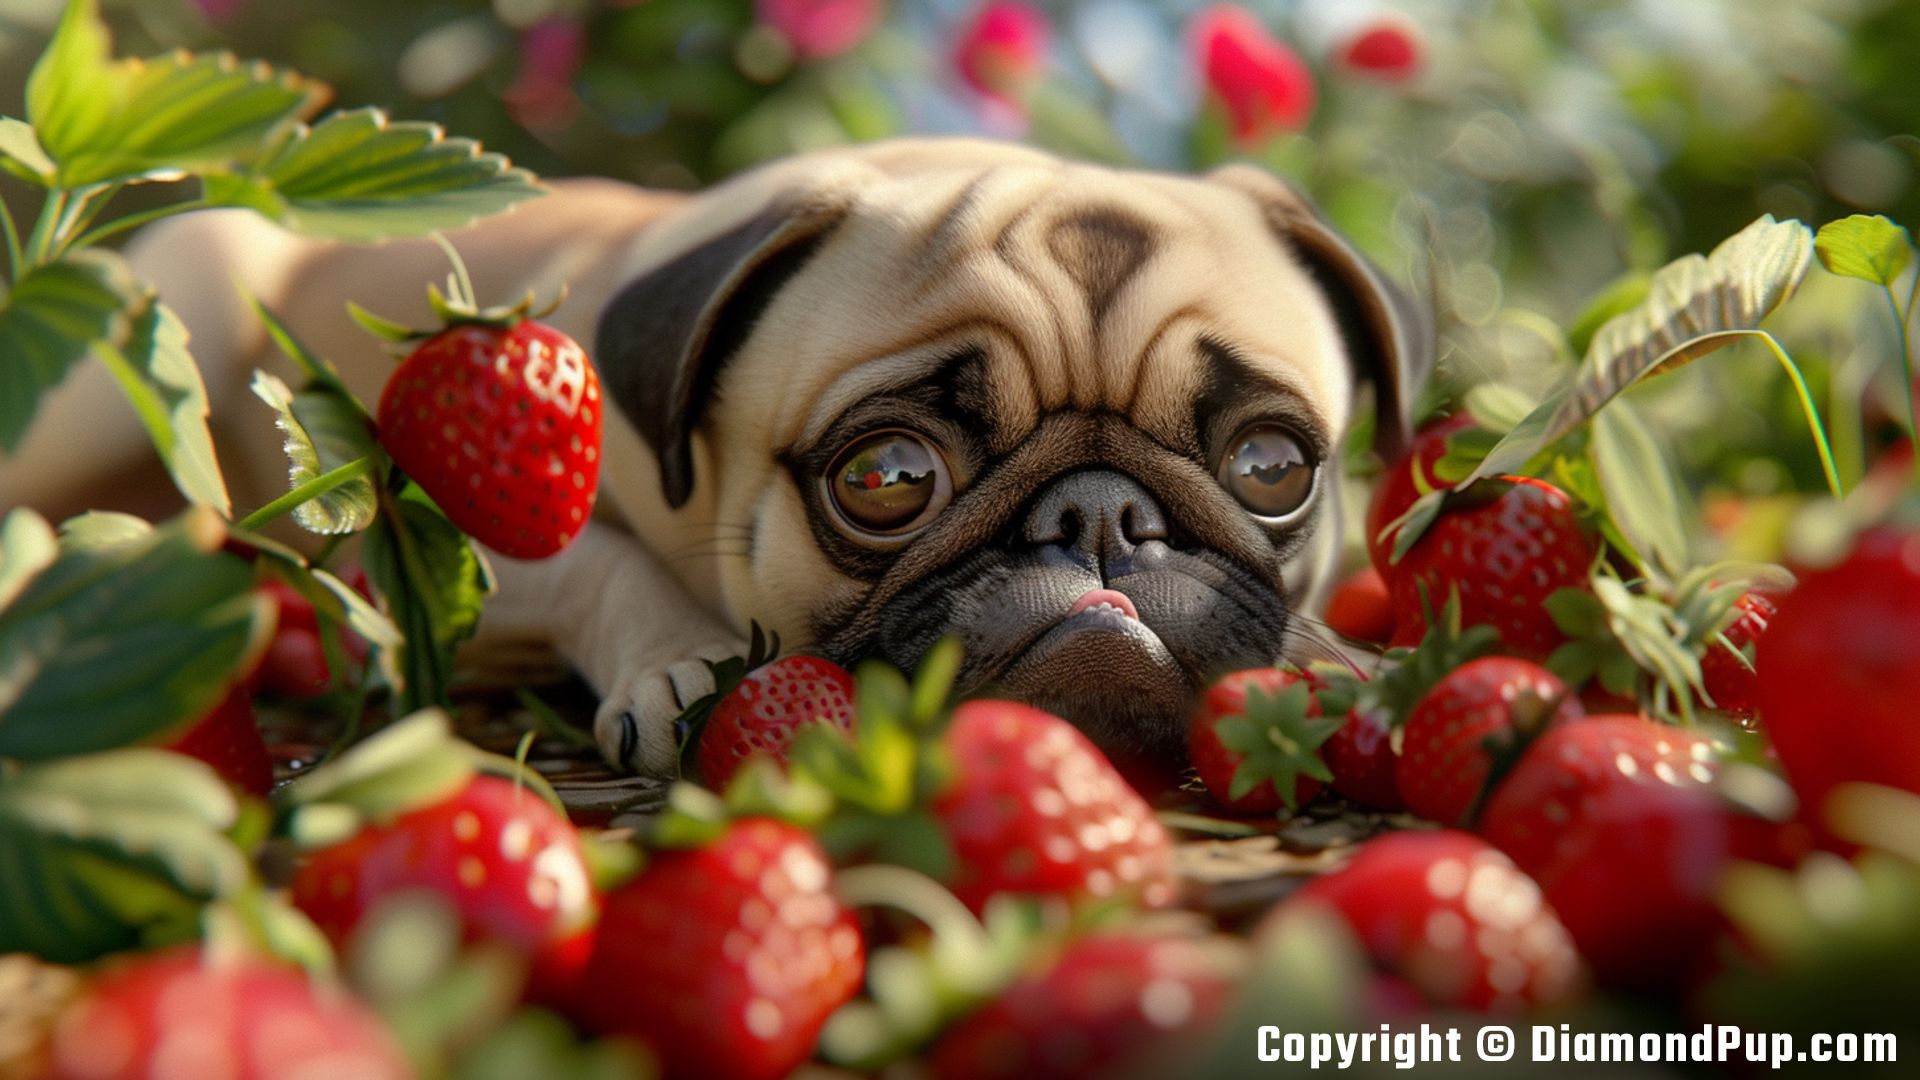 Picture of an Adorable Pug Snacking on Strawberries